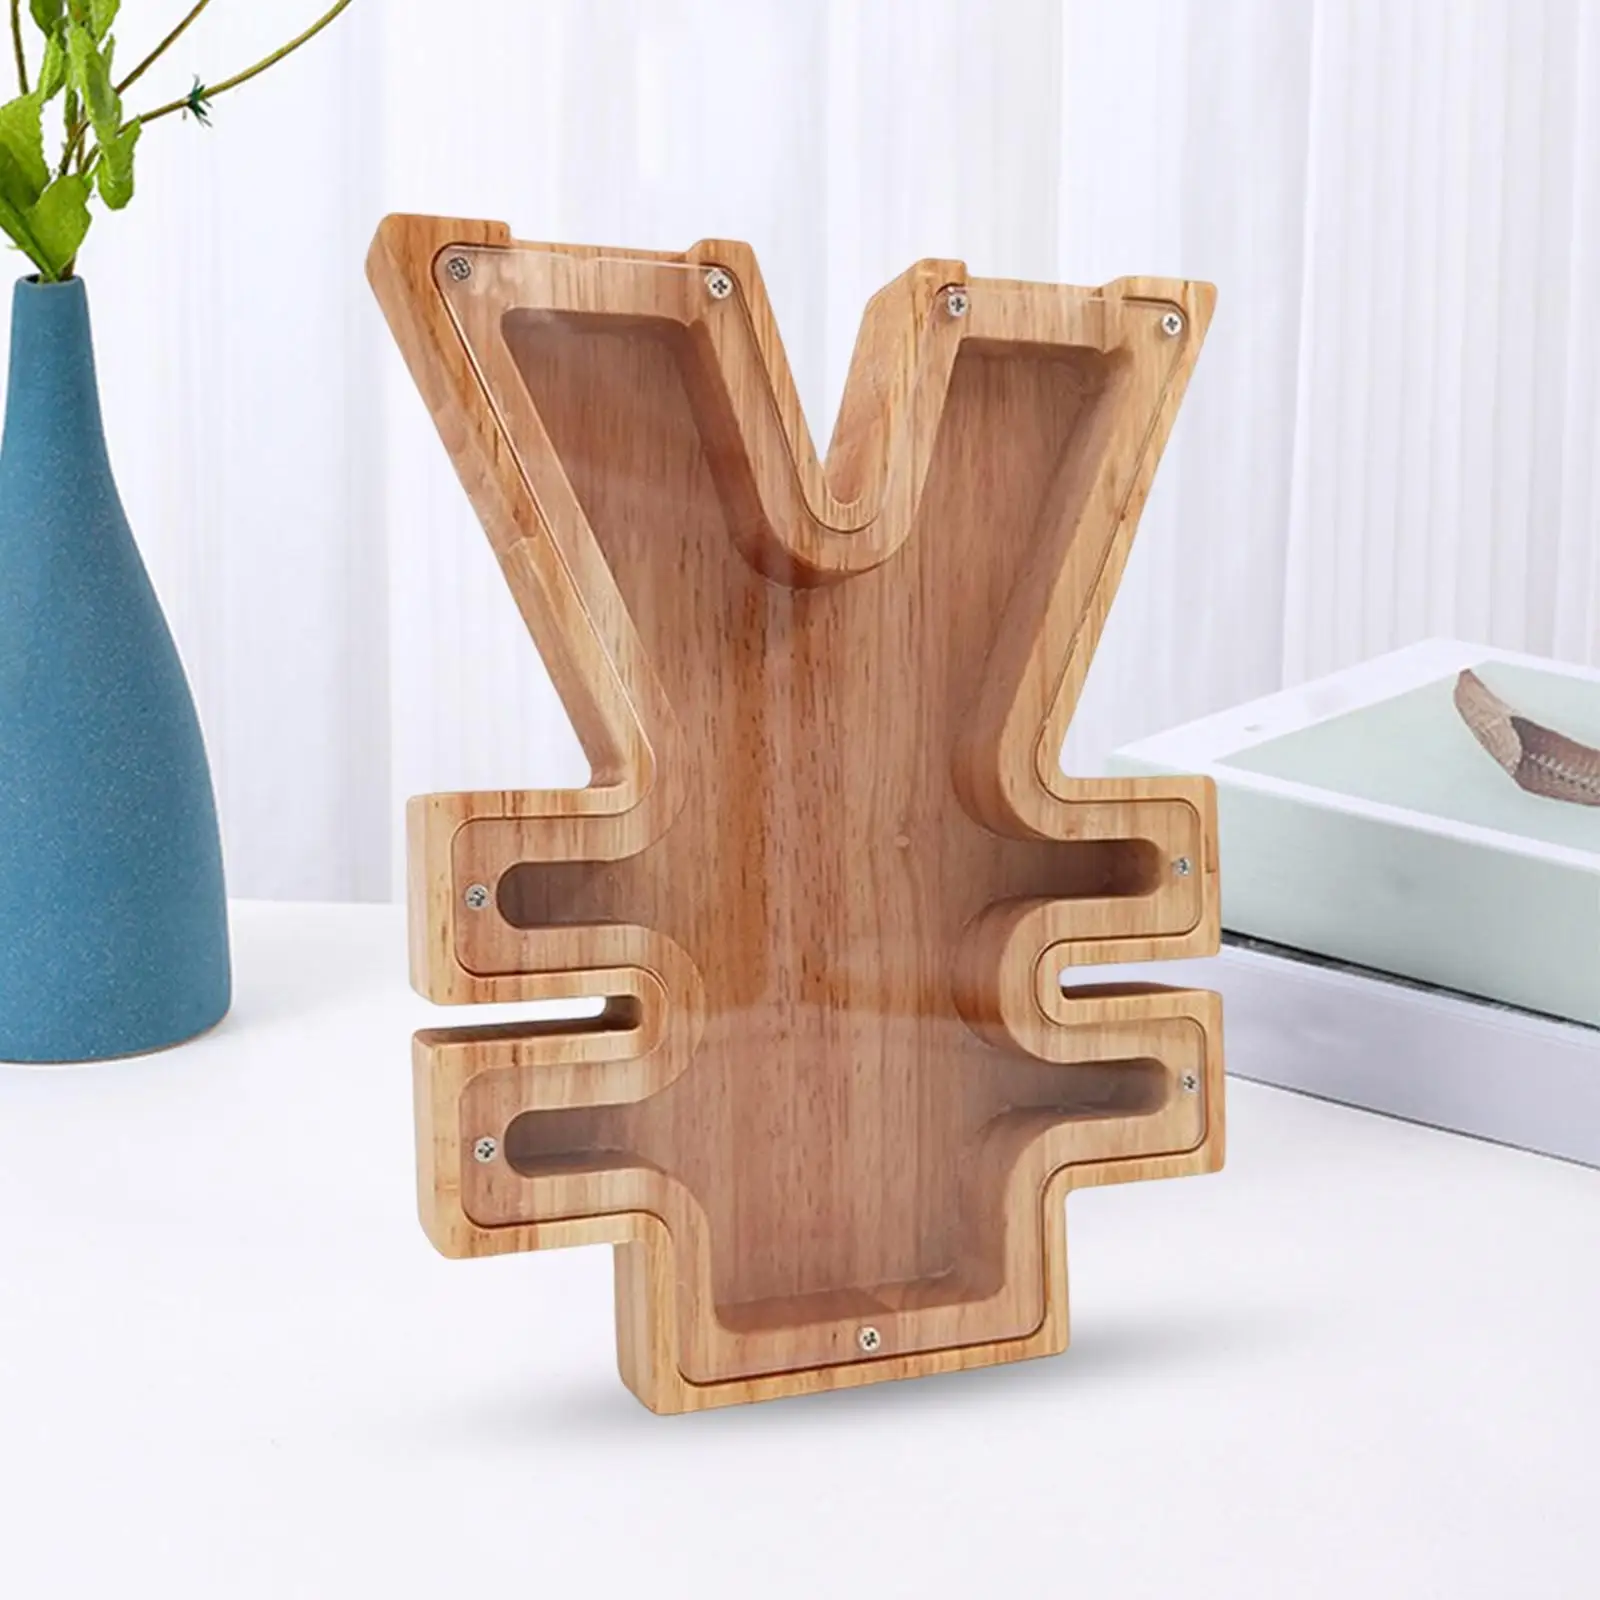 Wooden Money Box Rmb Symbol Decoration Organizer Container Present Storage Case Visible for Home Playhouse Girls Boys Friends